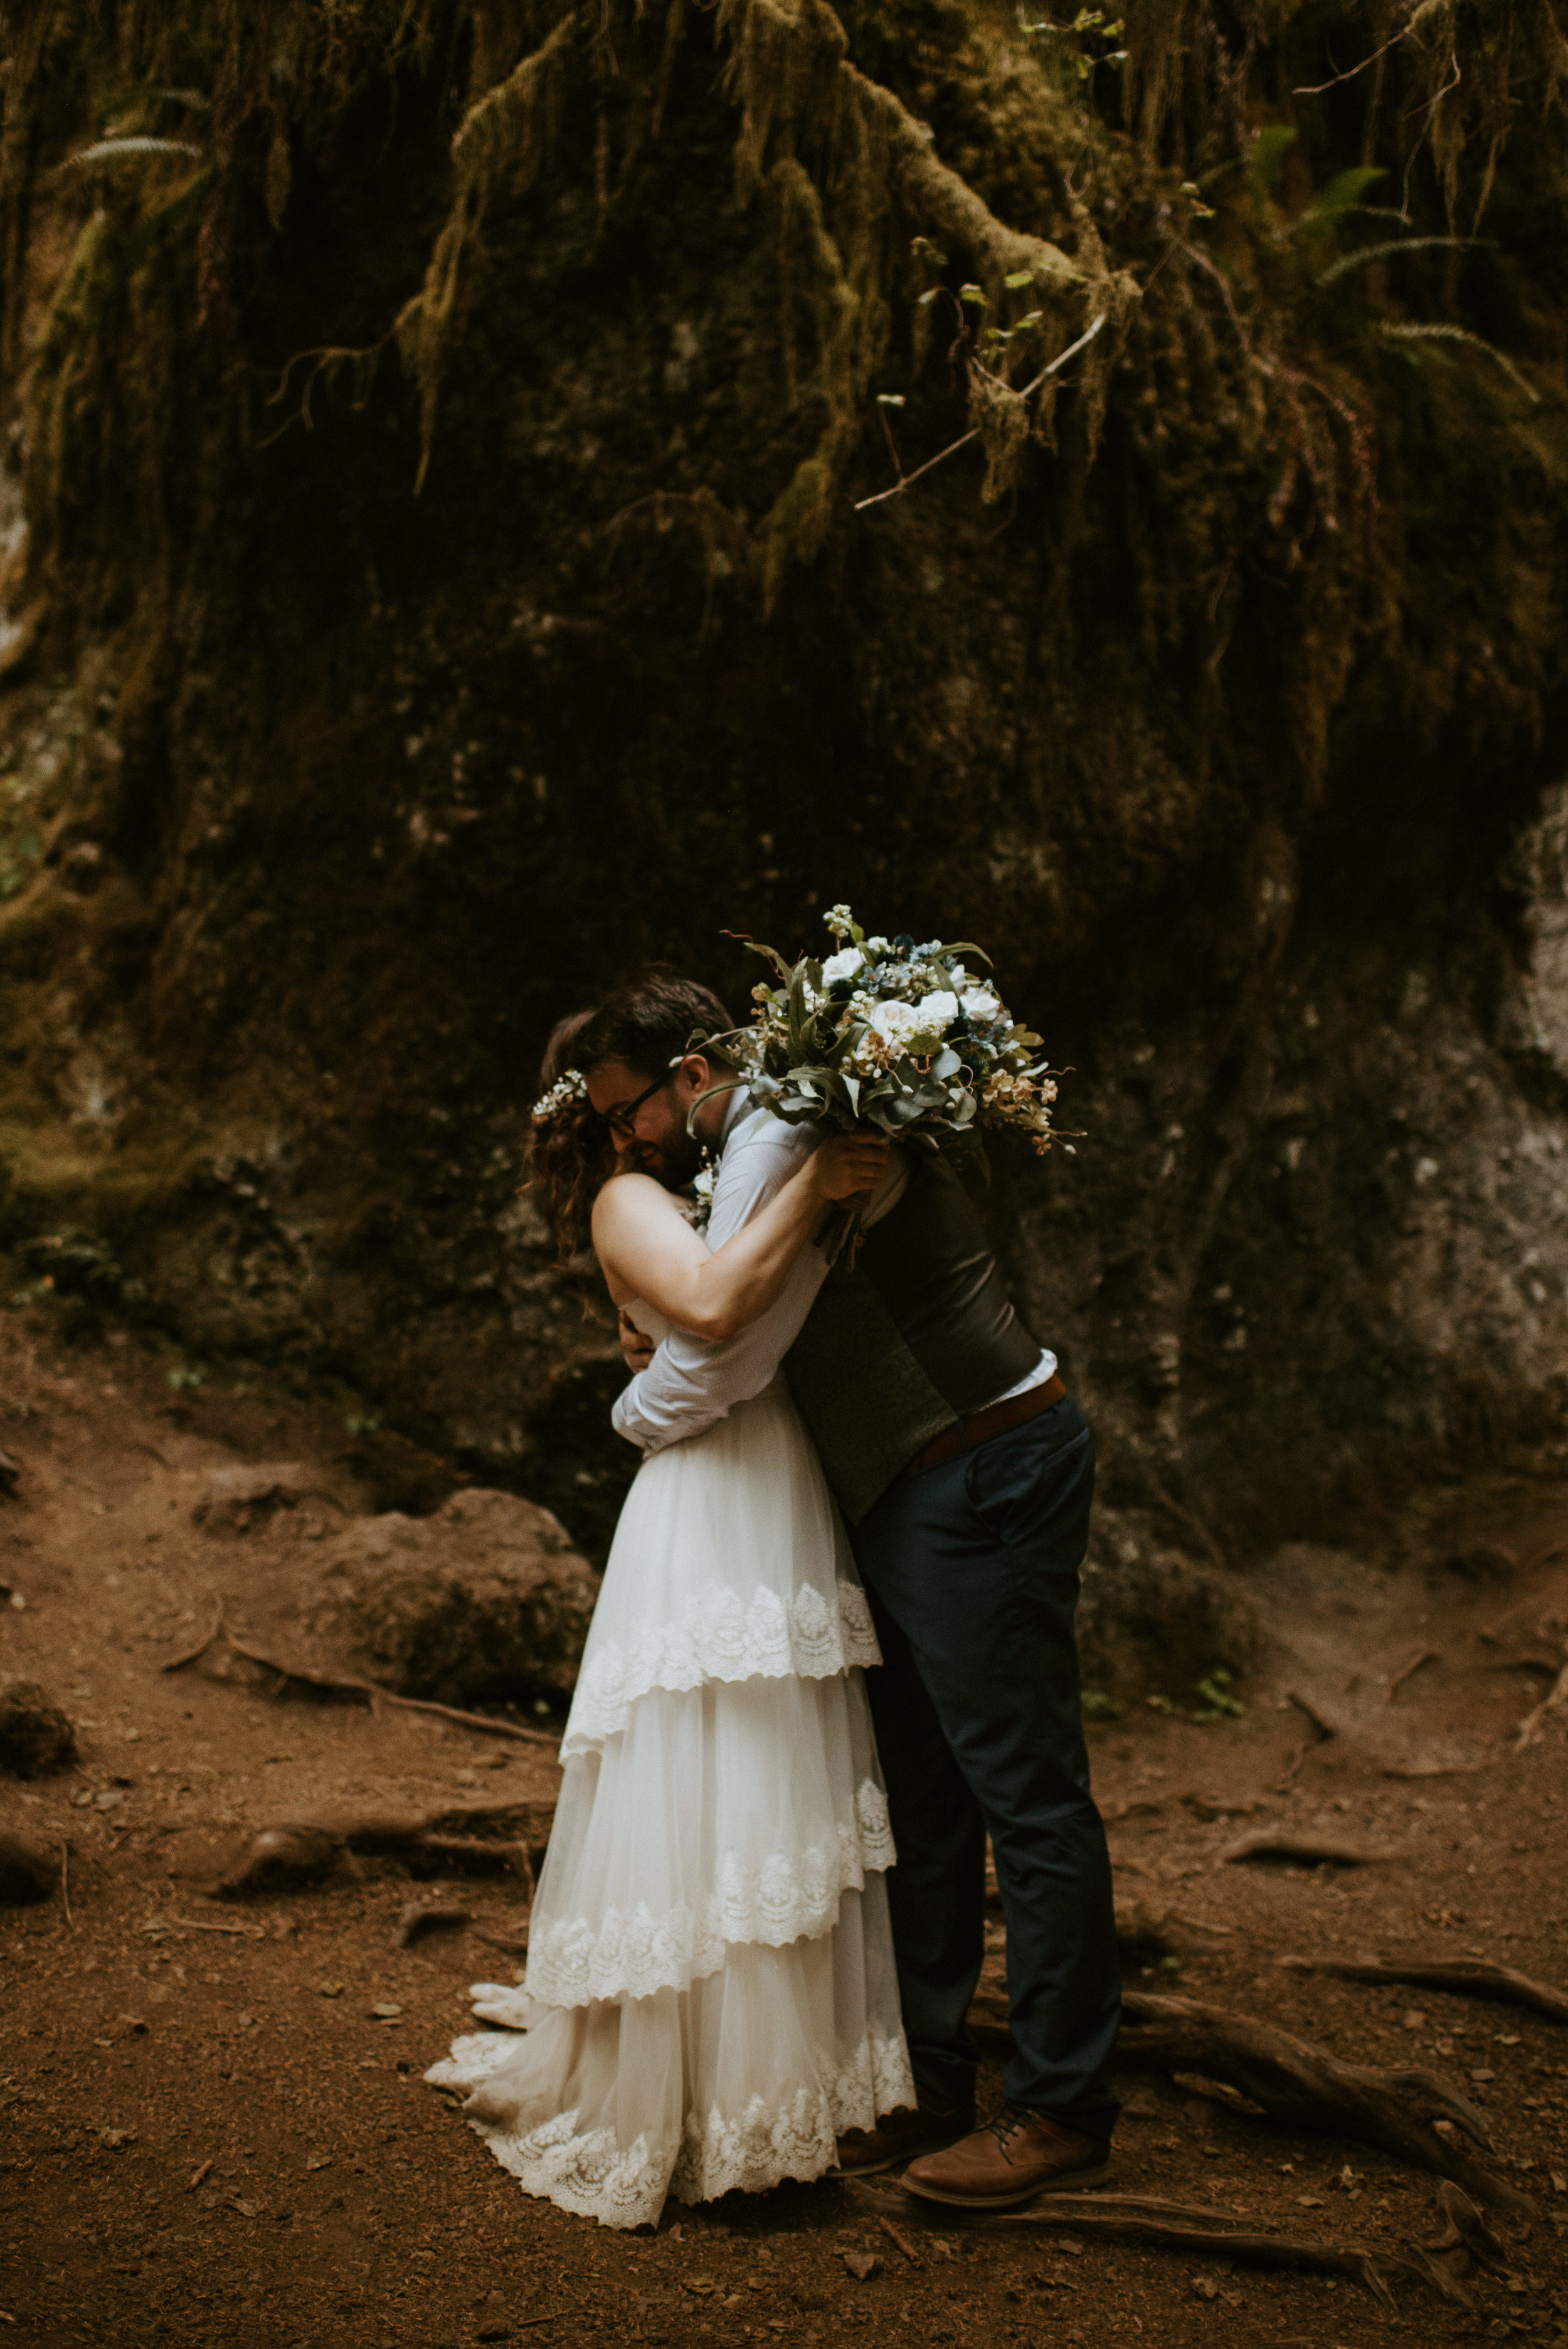 Chelsie + Matt's Marymere Falls Elopement at Olympic National Park by Kamra Fuller Photography